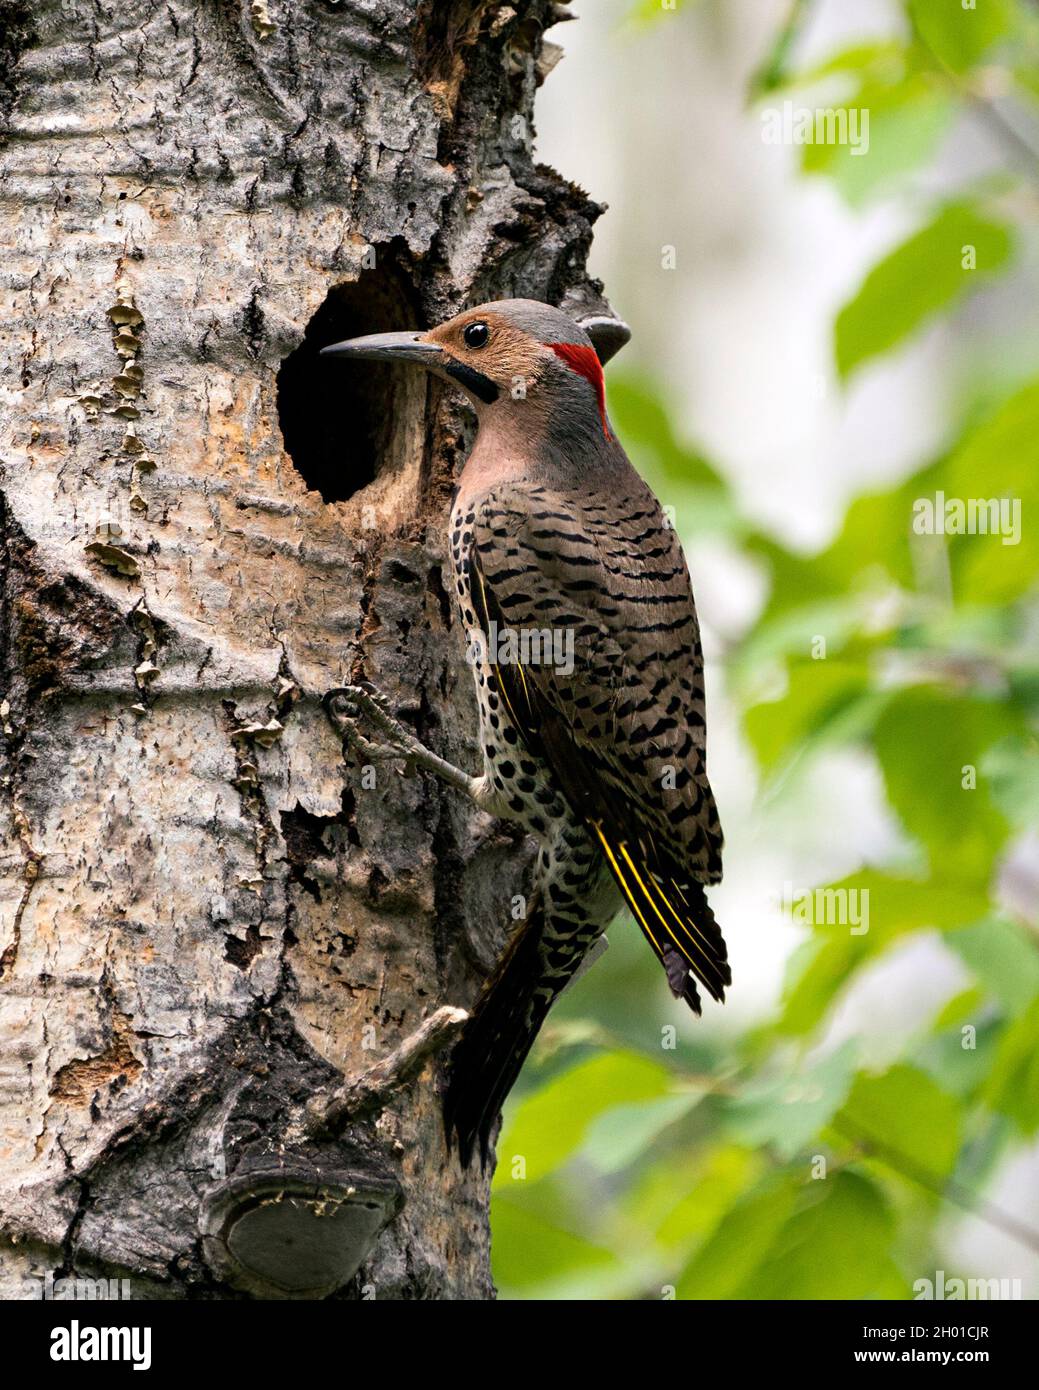 Northern Flicker male bird close-up view looking in its cavity nest entrance, in its environment and habitat surrounding during bird season mating. Stock Photo